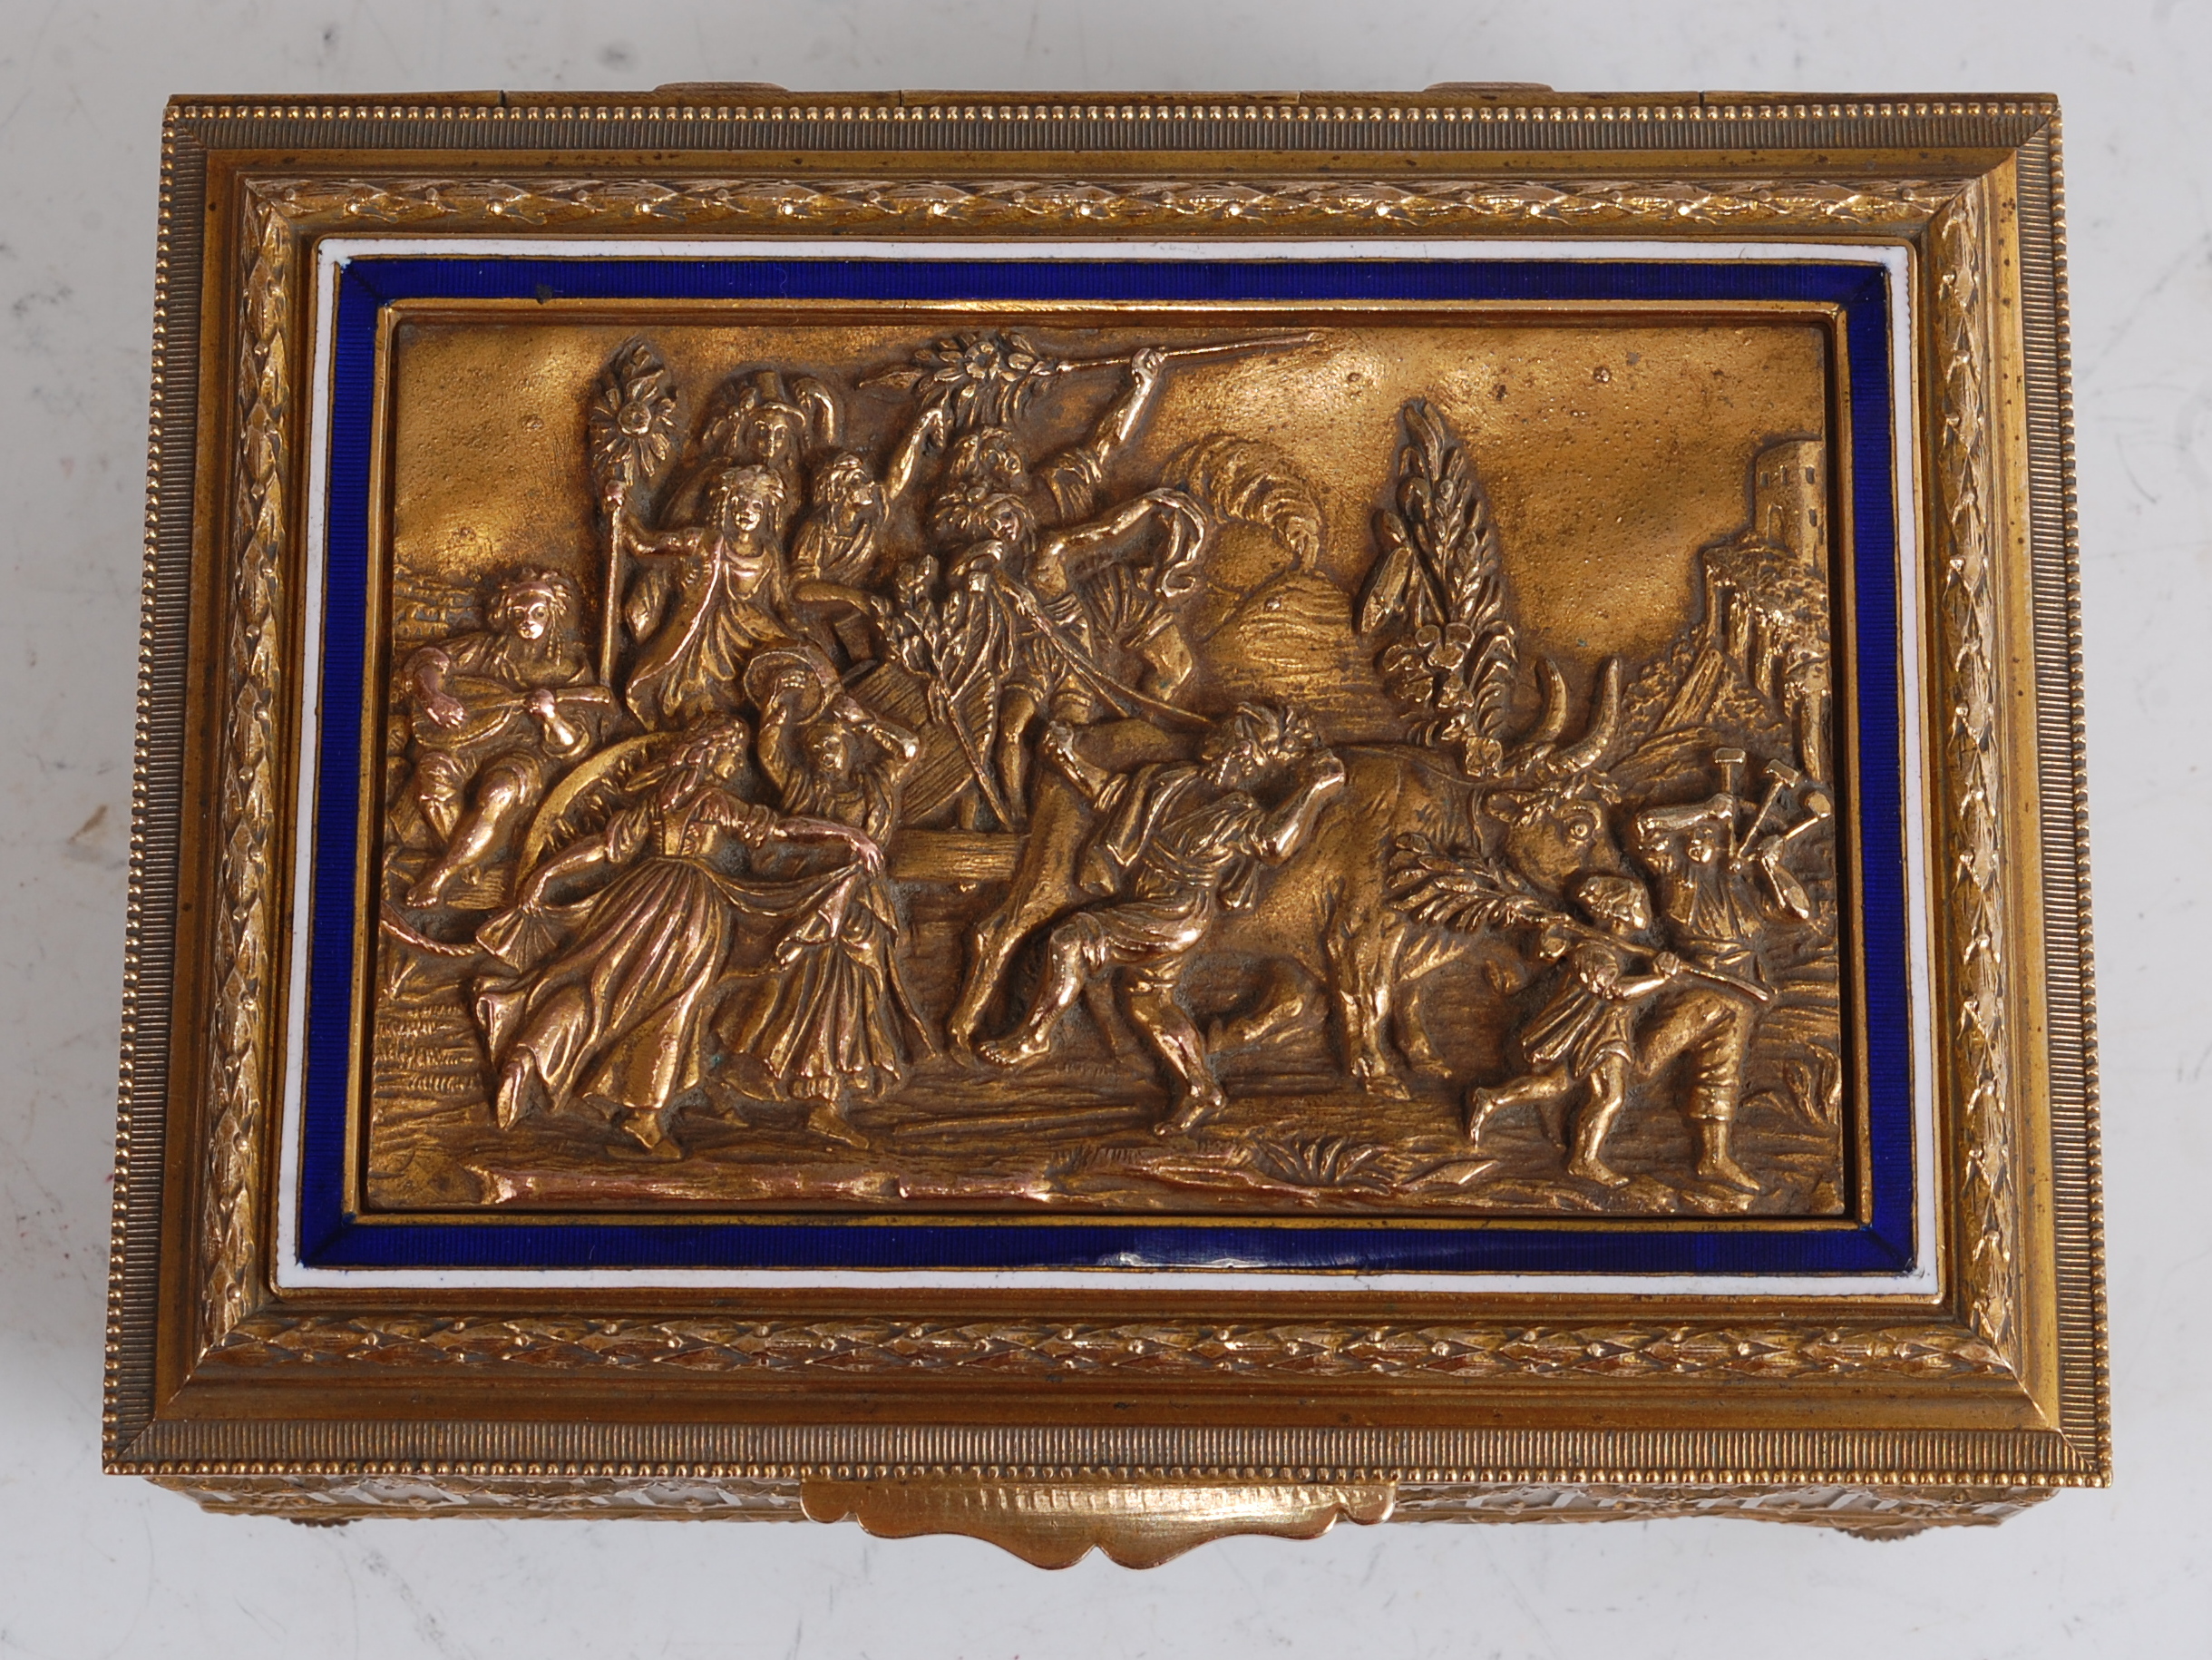 A late 19th century brass music box, the hinged cover cast with a scene of merry-making and - Image 2 of 3